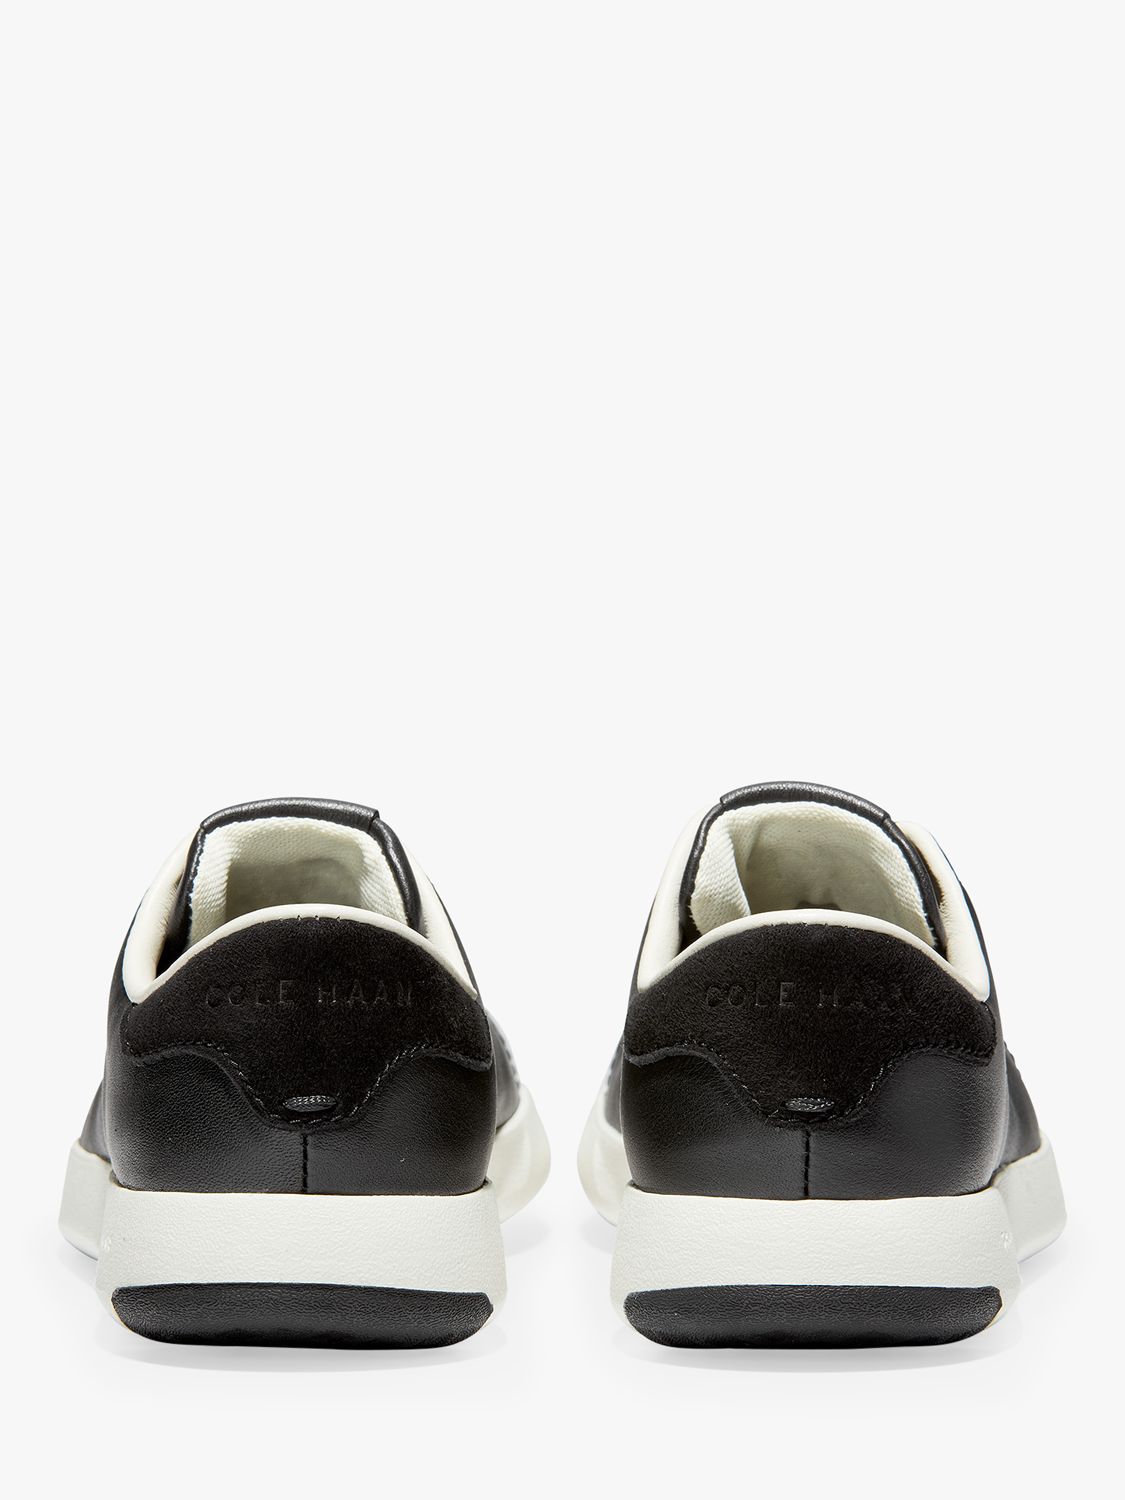 Cole Haan Grandpro Leather Tennis Trainers, Black at John Lewis & Partners